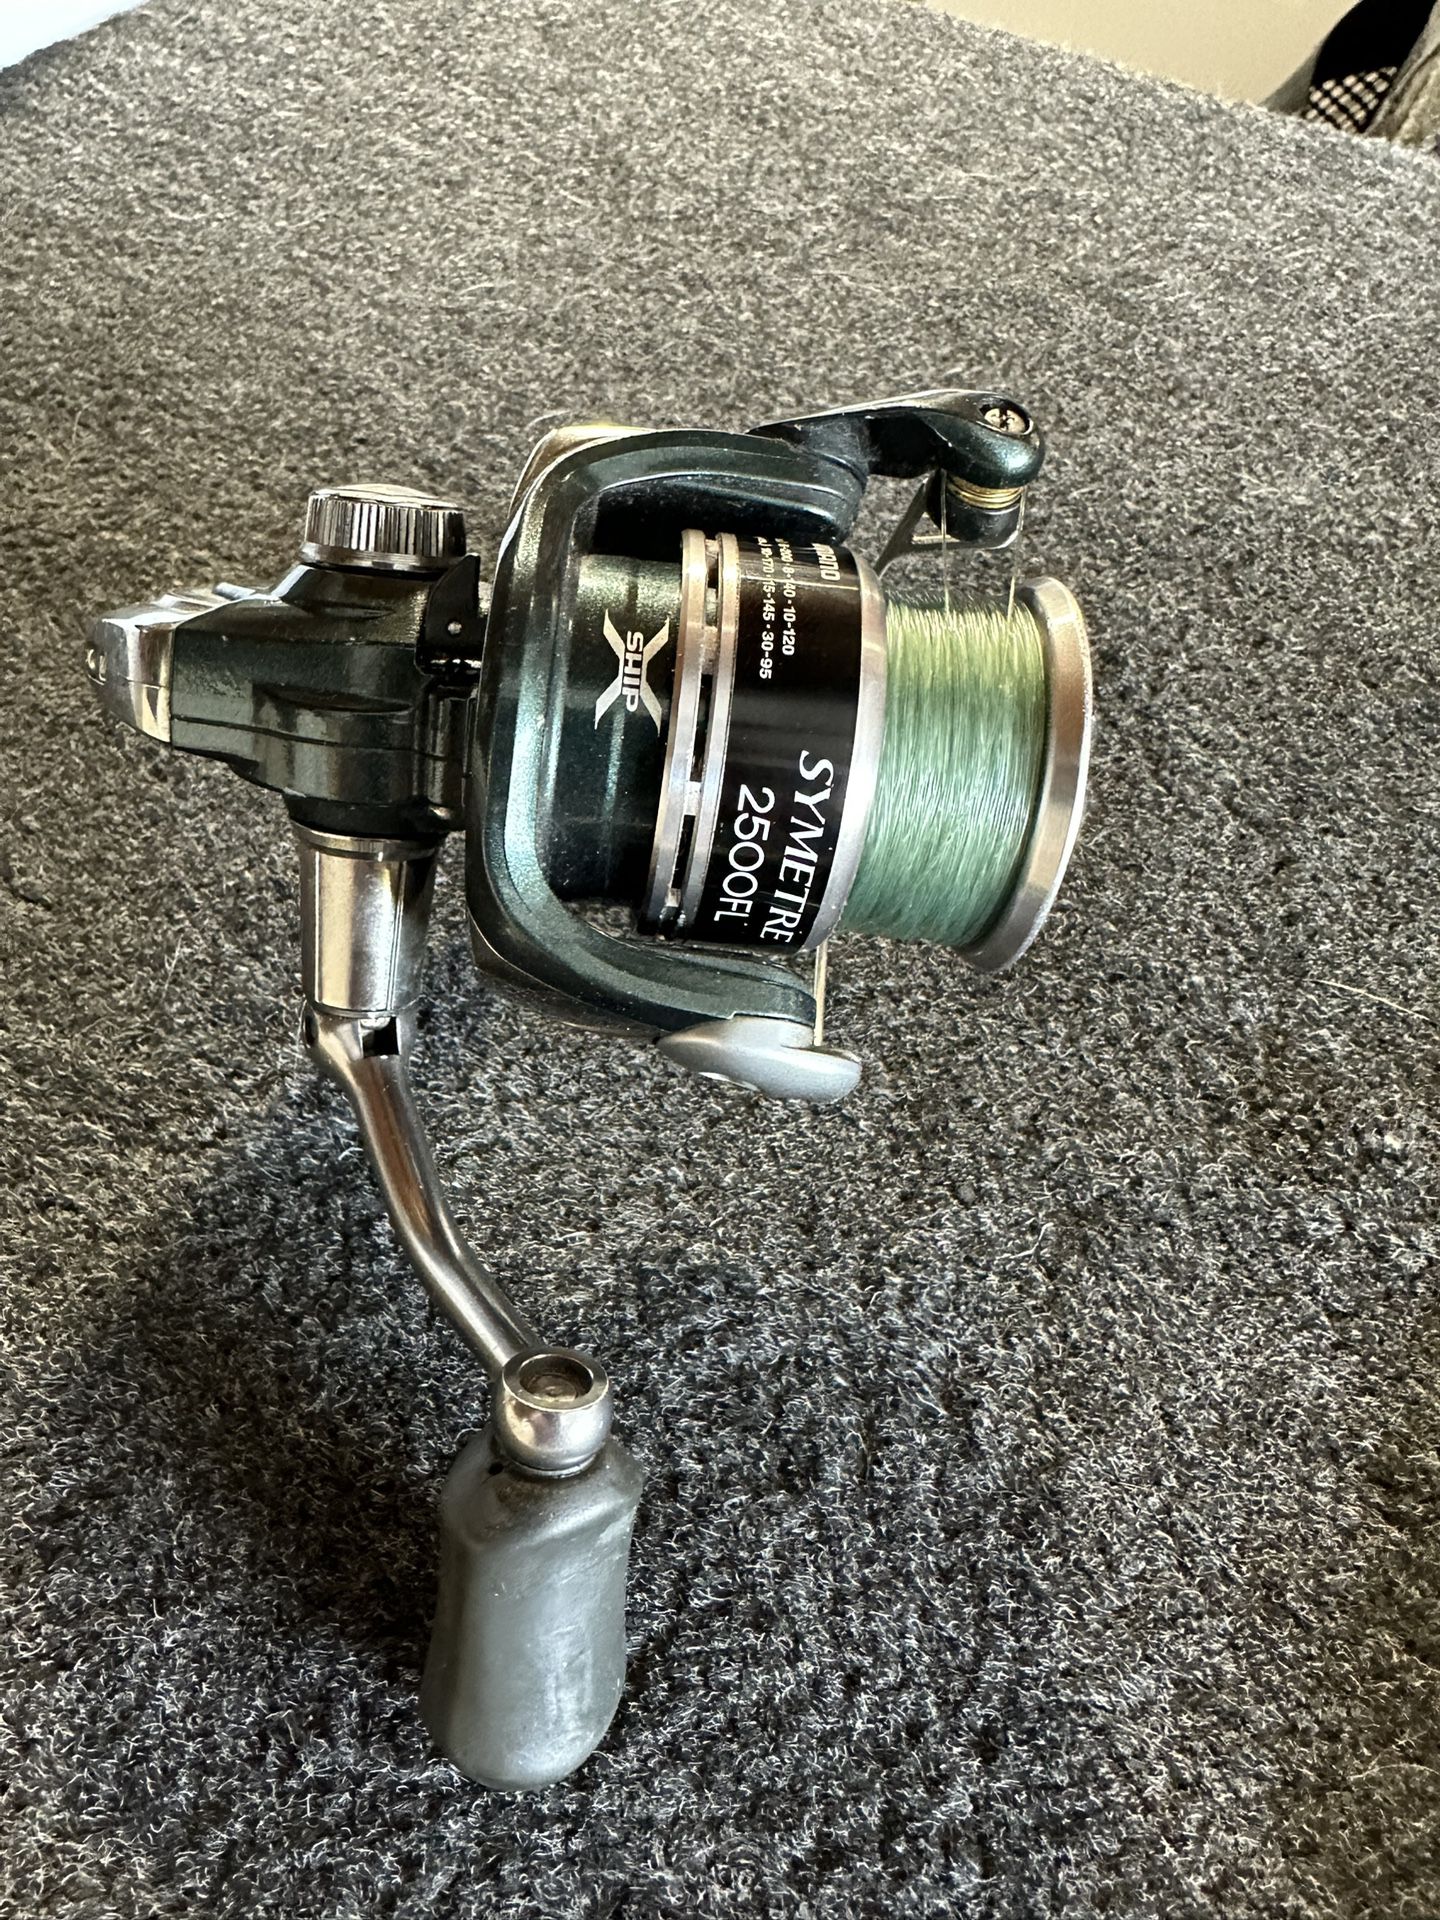 Shimano Symetre 2500 For Sale In Modesto, CA OfferUp, 42% OFF